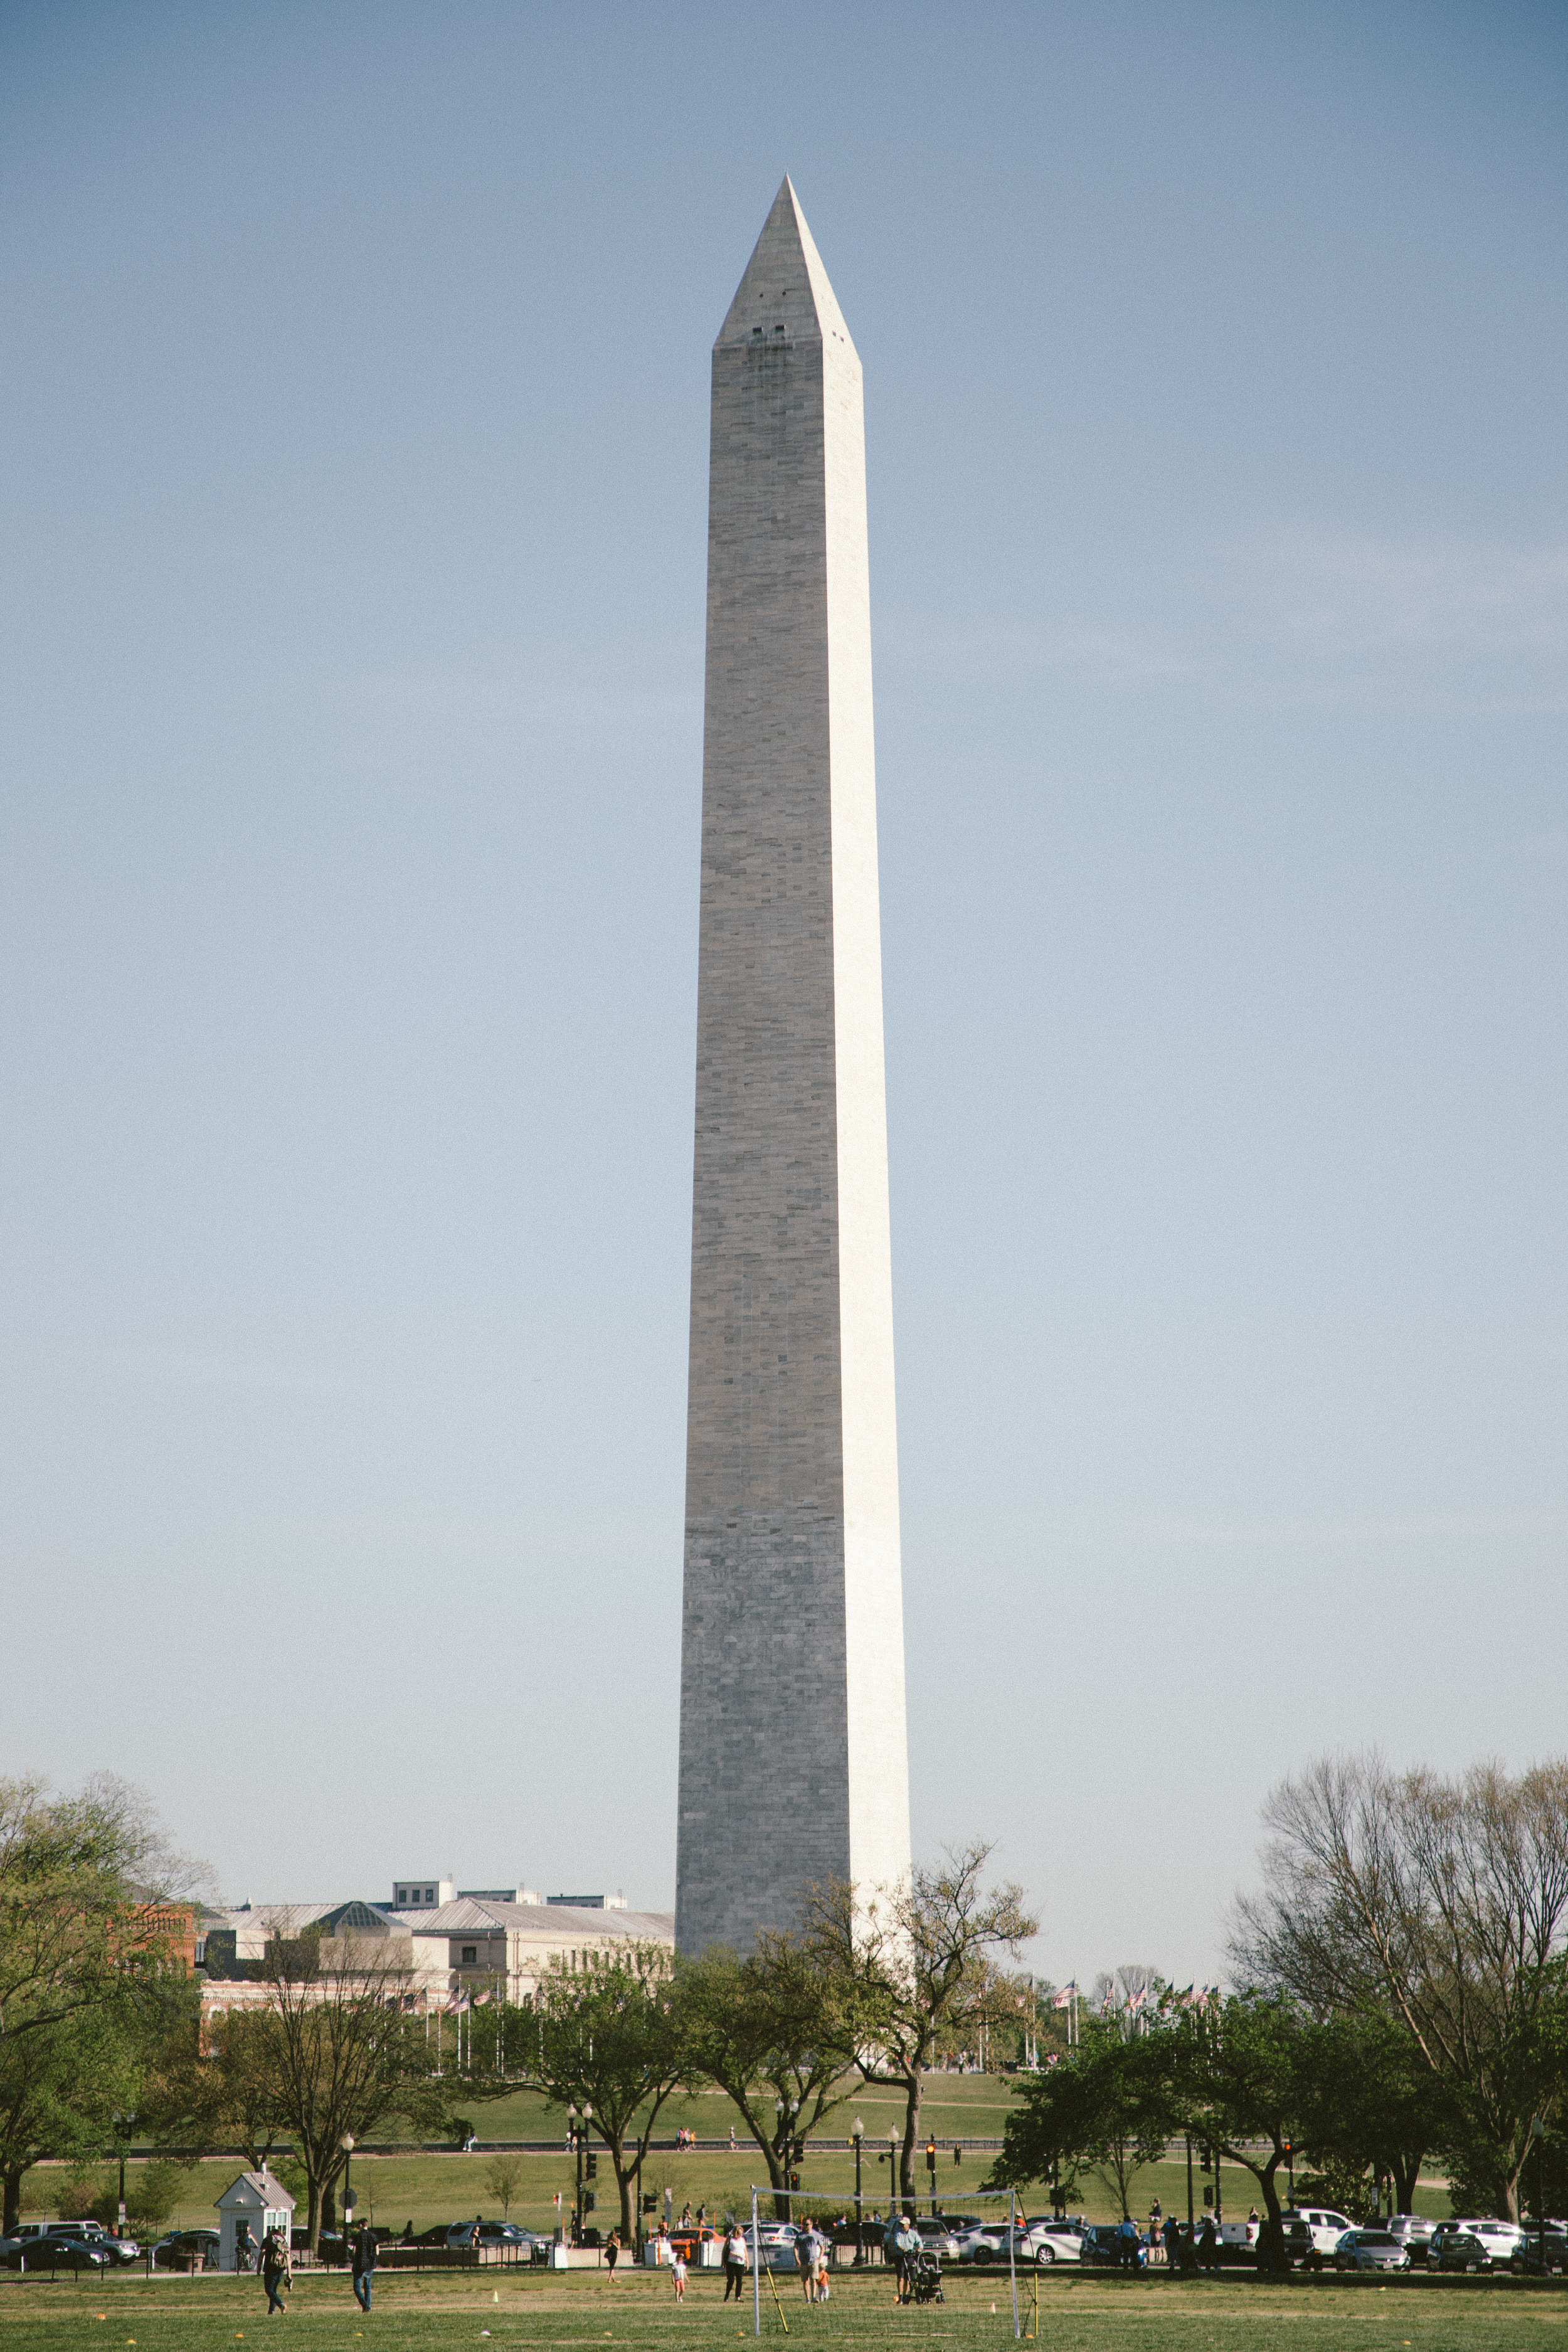  "Once the tallest building in the world, at just over 555 feet, the monument to America’s first president still holds the title of world’s tallest stone structure and obelisk." 